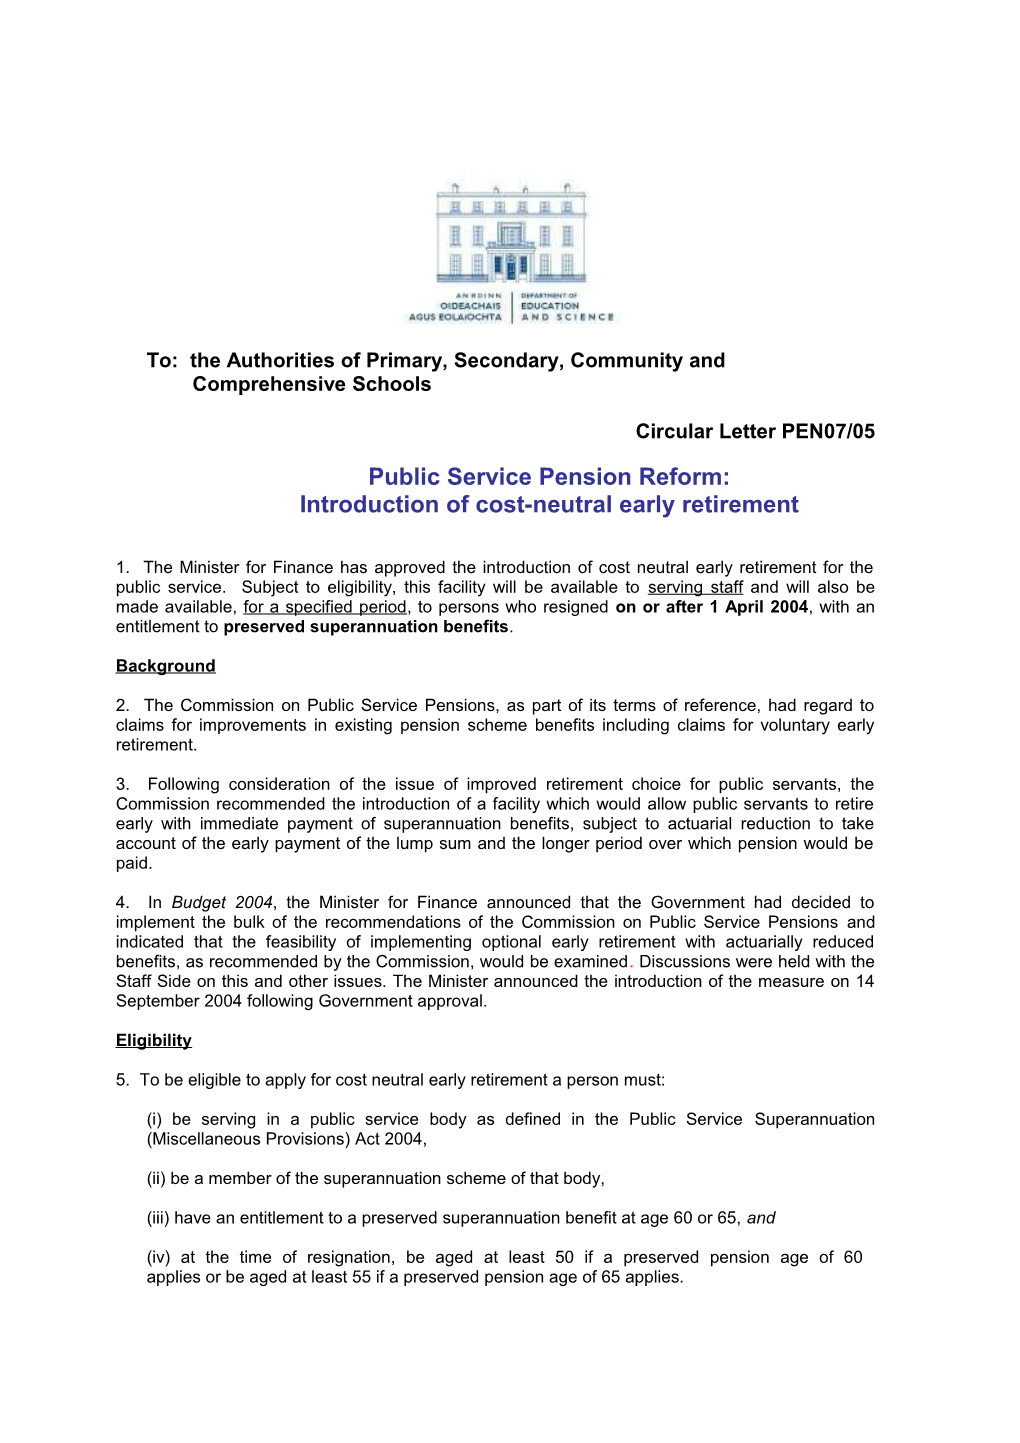 Circular PEN07/05 - Public Service Pension Reform: Introduction of Cost-Neutral Early Retirement